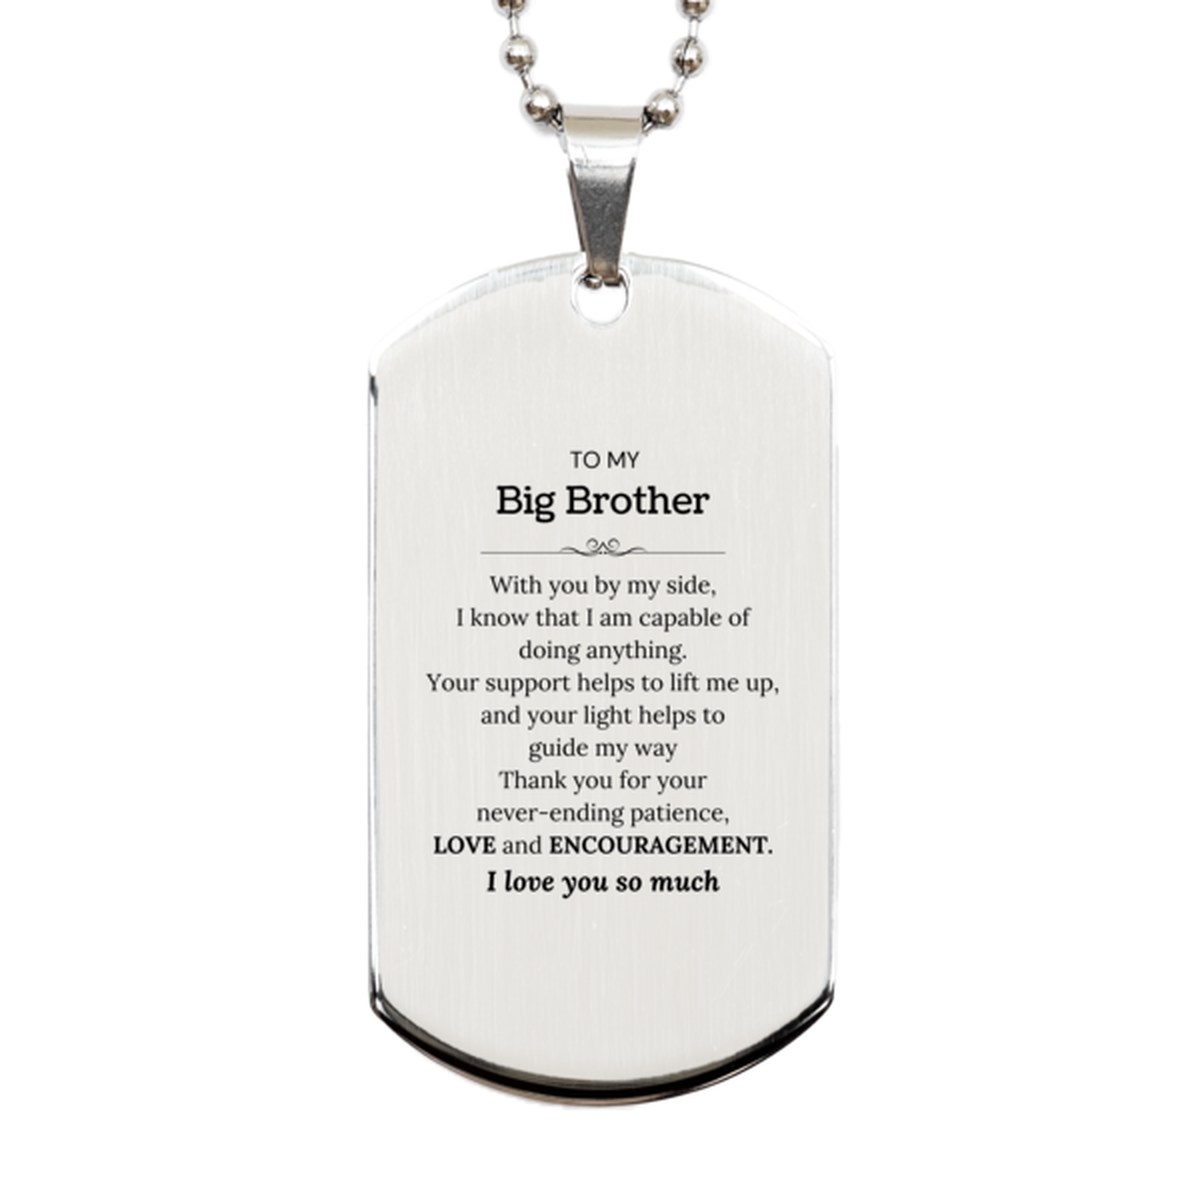 Appreciation Big Brother Silver Dog Tag Gifts, To My Big Brother Birthday Christmas Wedding Keepsake Gifts for Big Brother With you by my side, I know that I am capable of doing anything. I love you so much